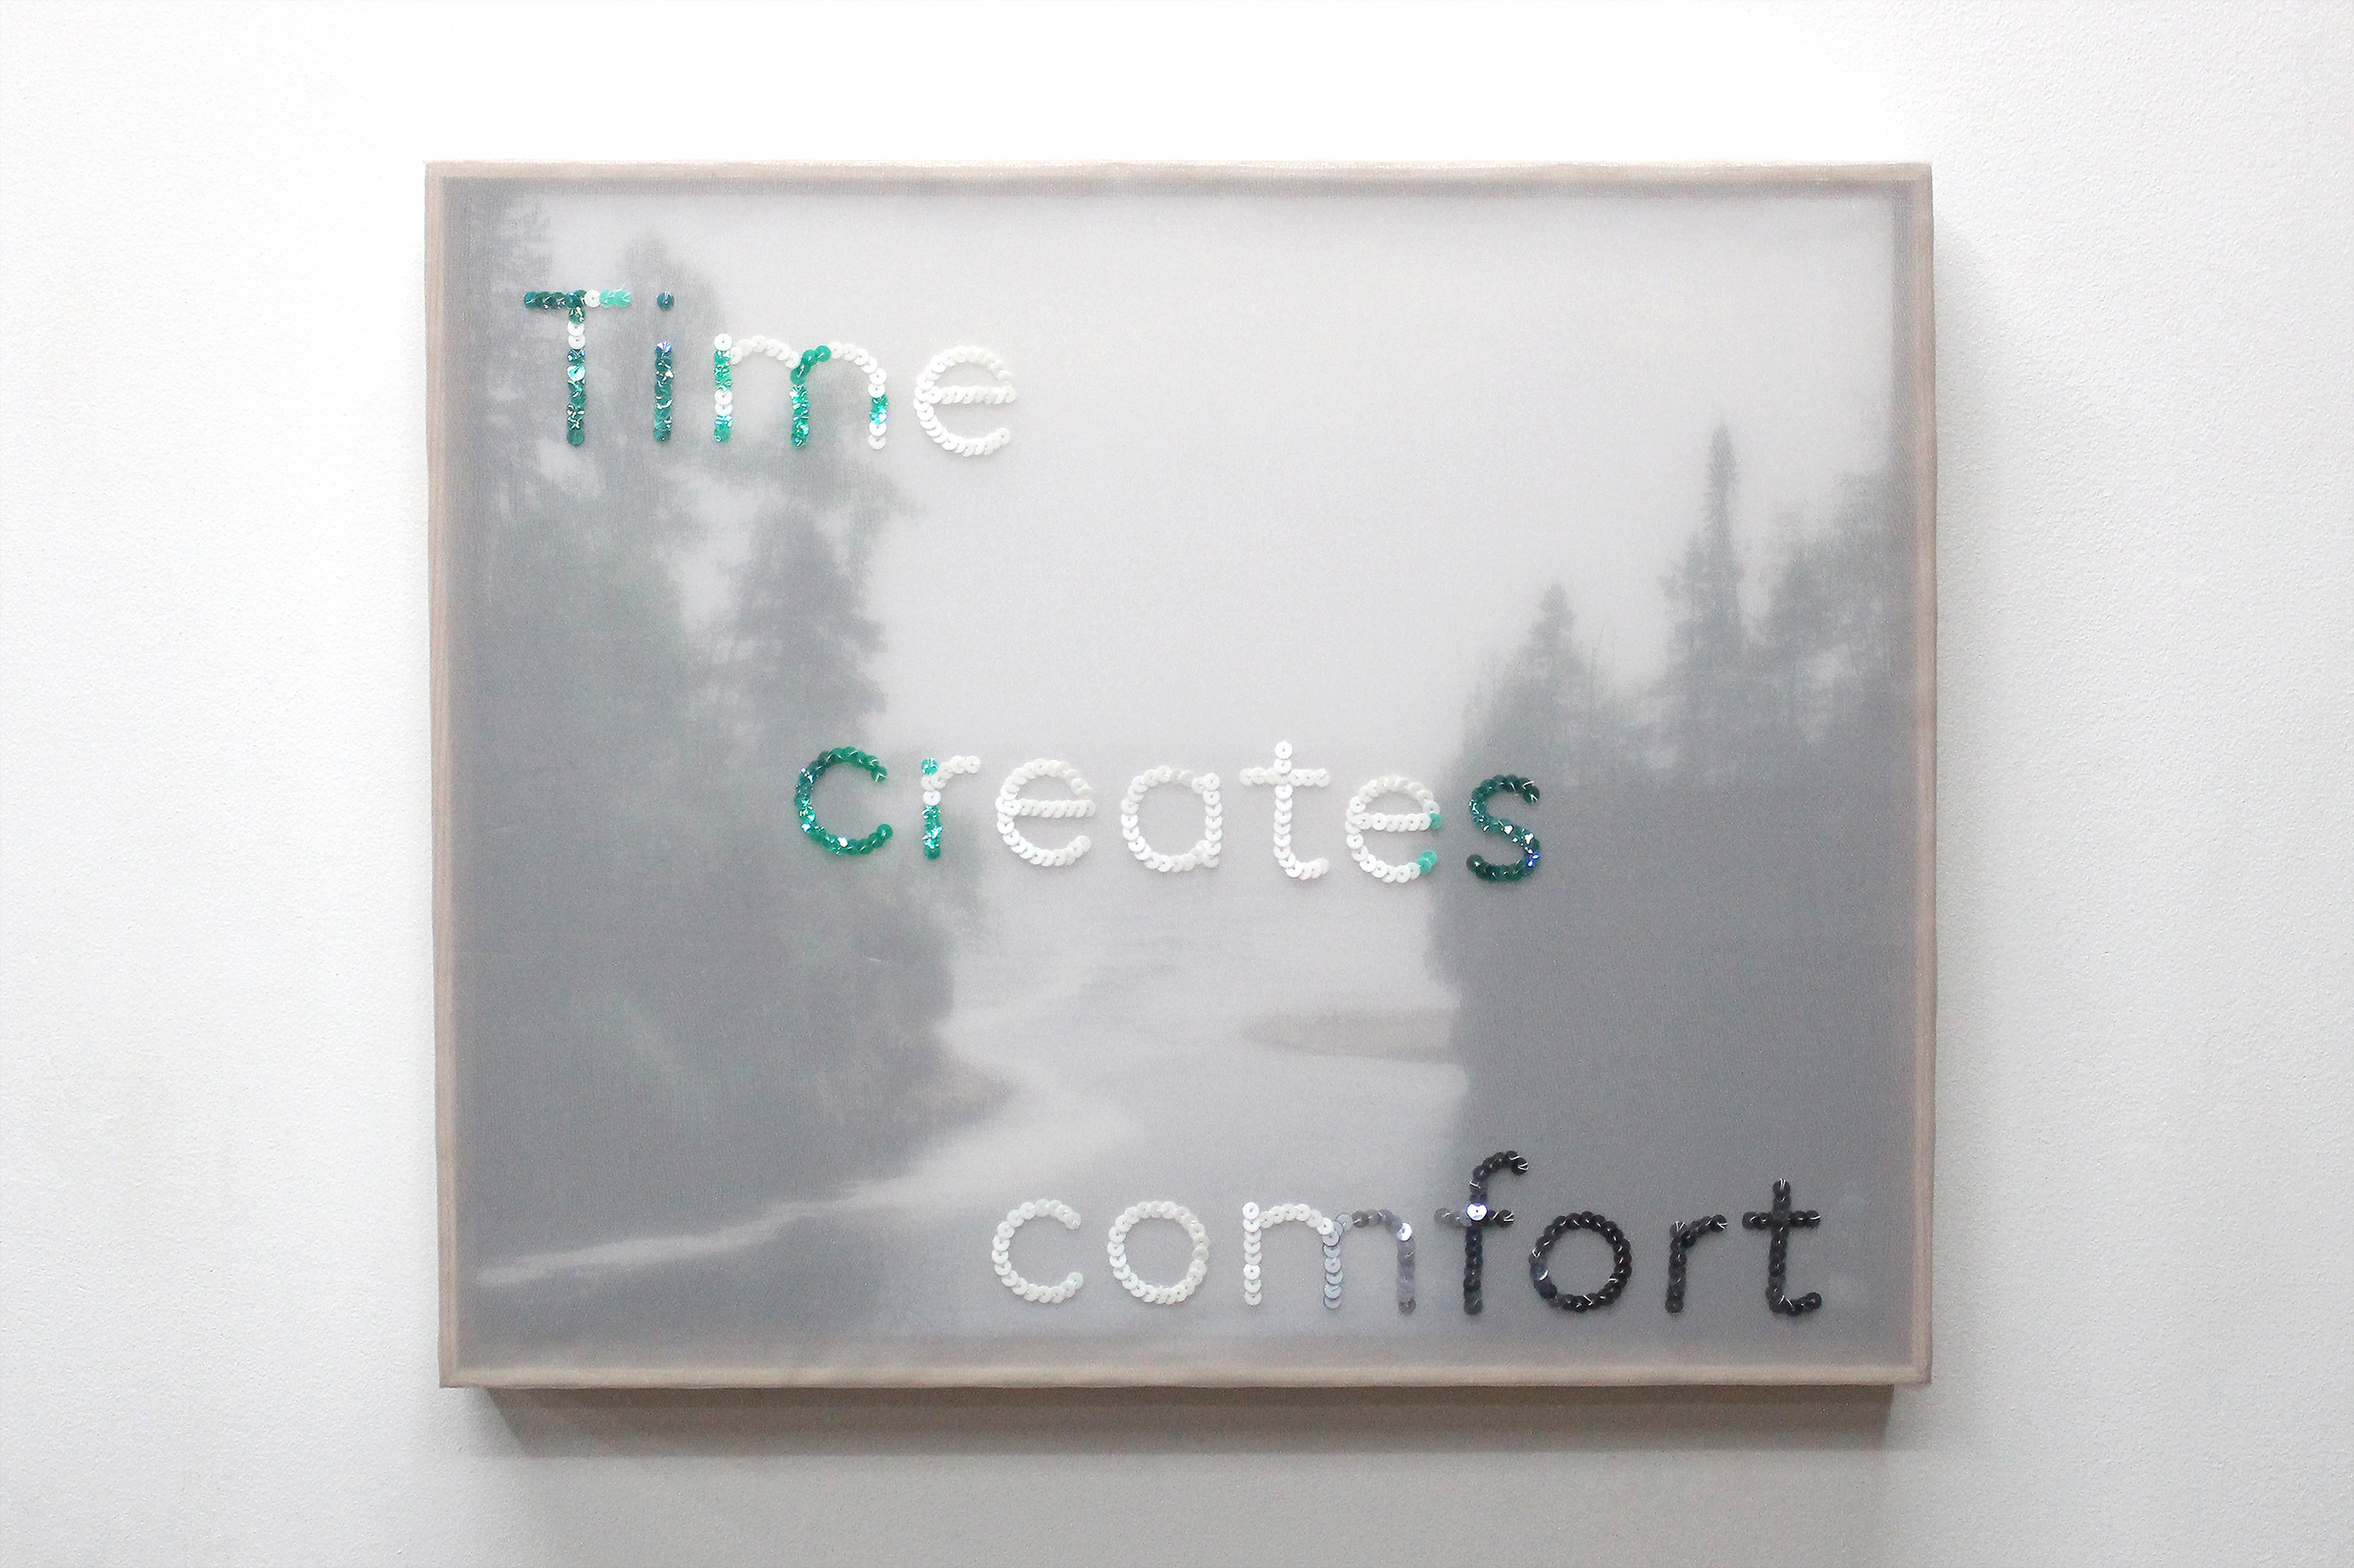   Time create comfort  Photographic print on canvas, sequin, and embroidery thread on organza 16” x 20” 2019 